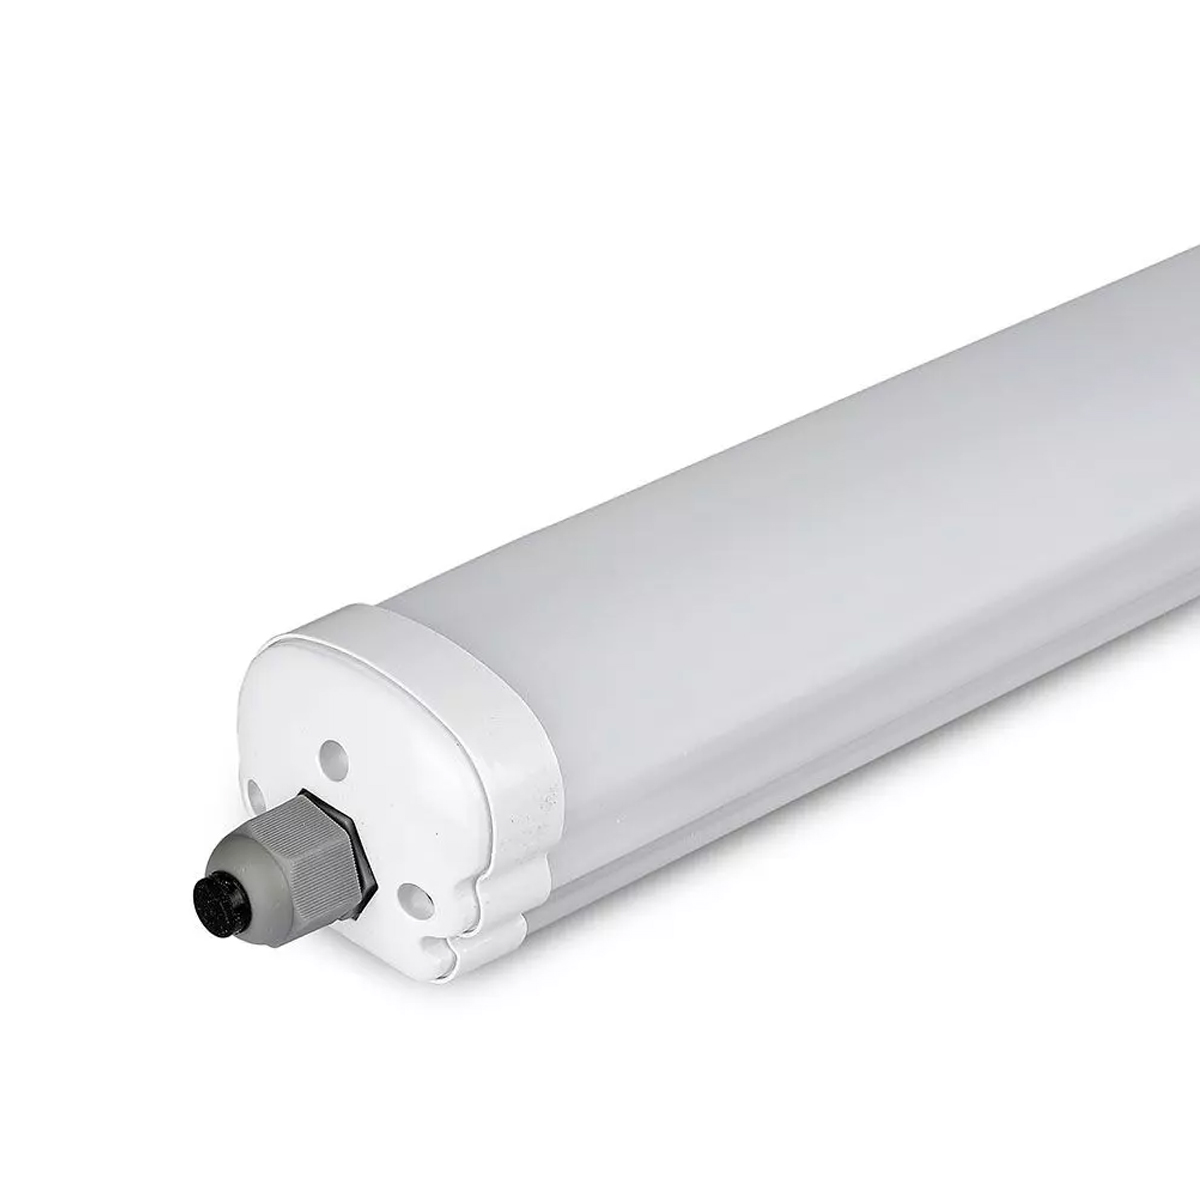 View 5FT LED Waterproof IP65 Batten Light Cool or Natural White information